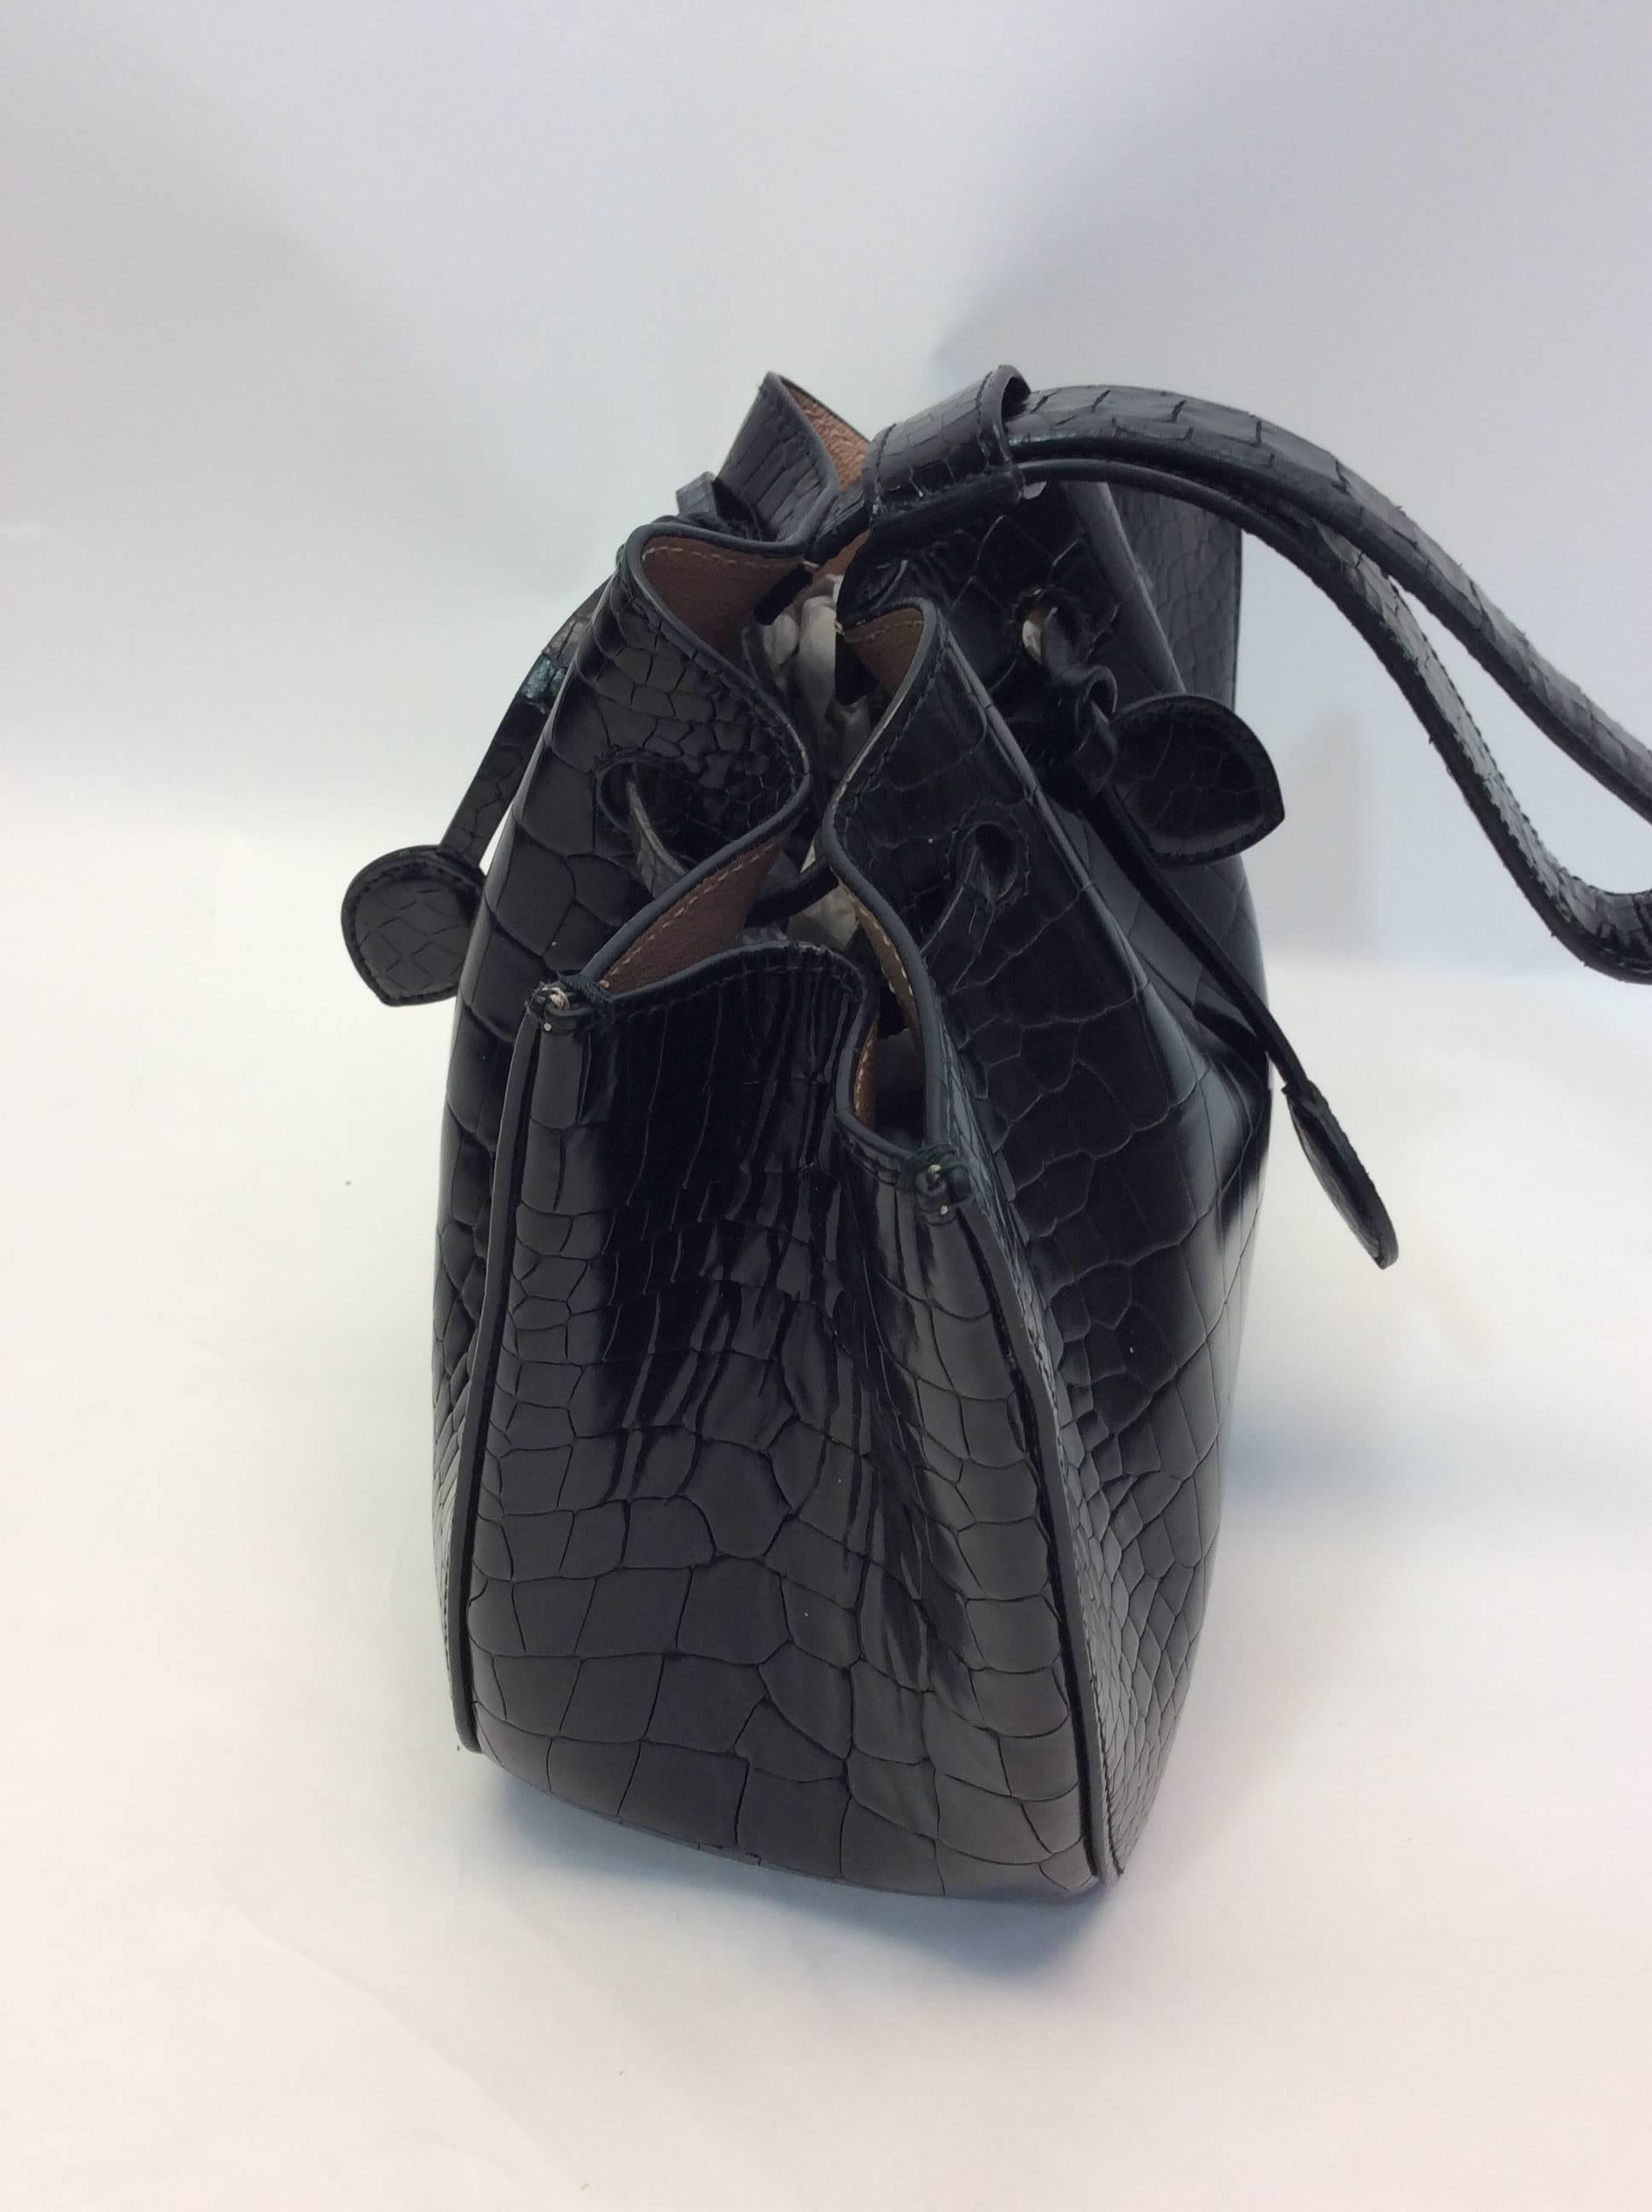 Black Wristlet Bucket Bag
8 inches tall, 11 inches wide, 4 inches deep
6.5 inch strap drop
Drawstring closure
Adjustable strap
Features detachable Alaia logo mirror
Calf leather exterior and lining